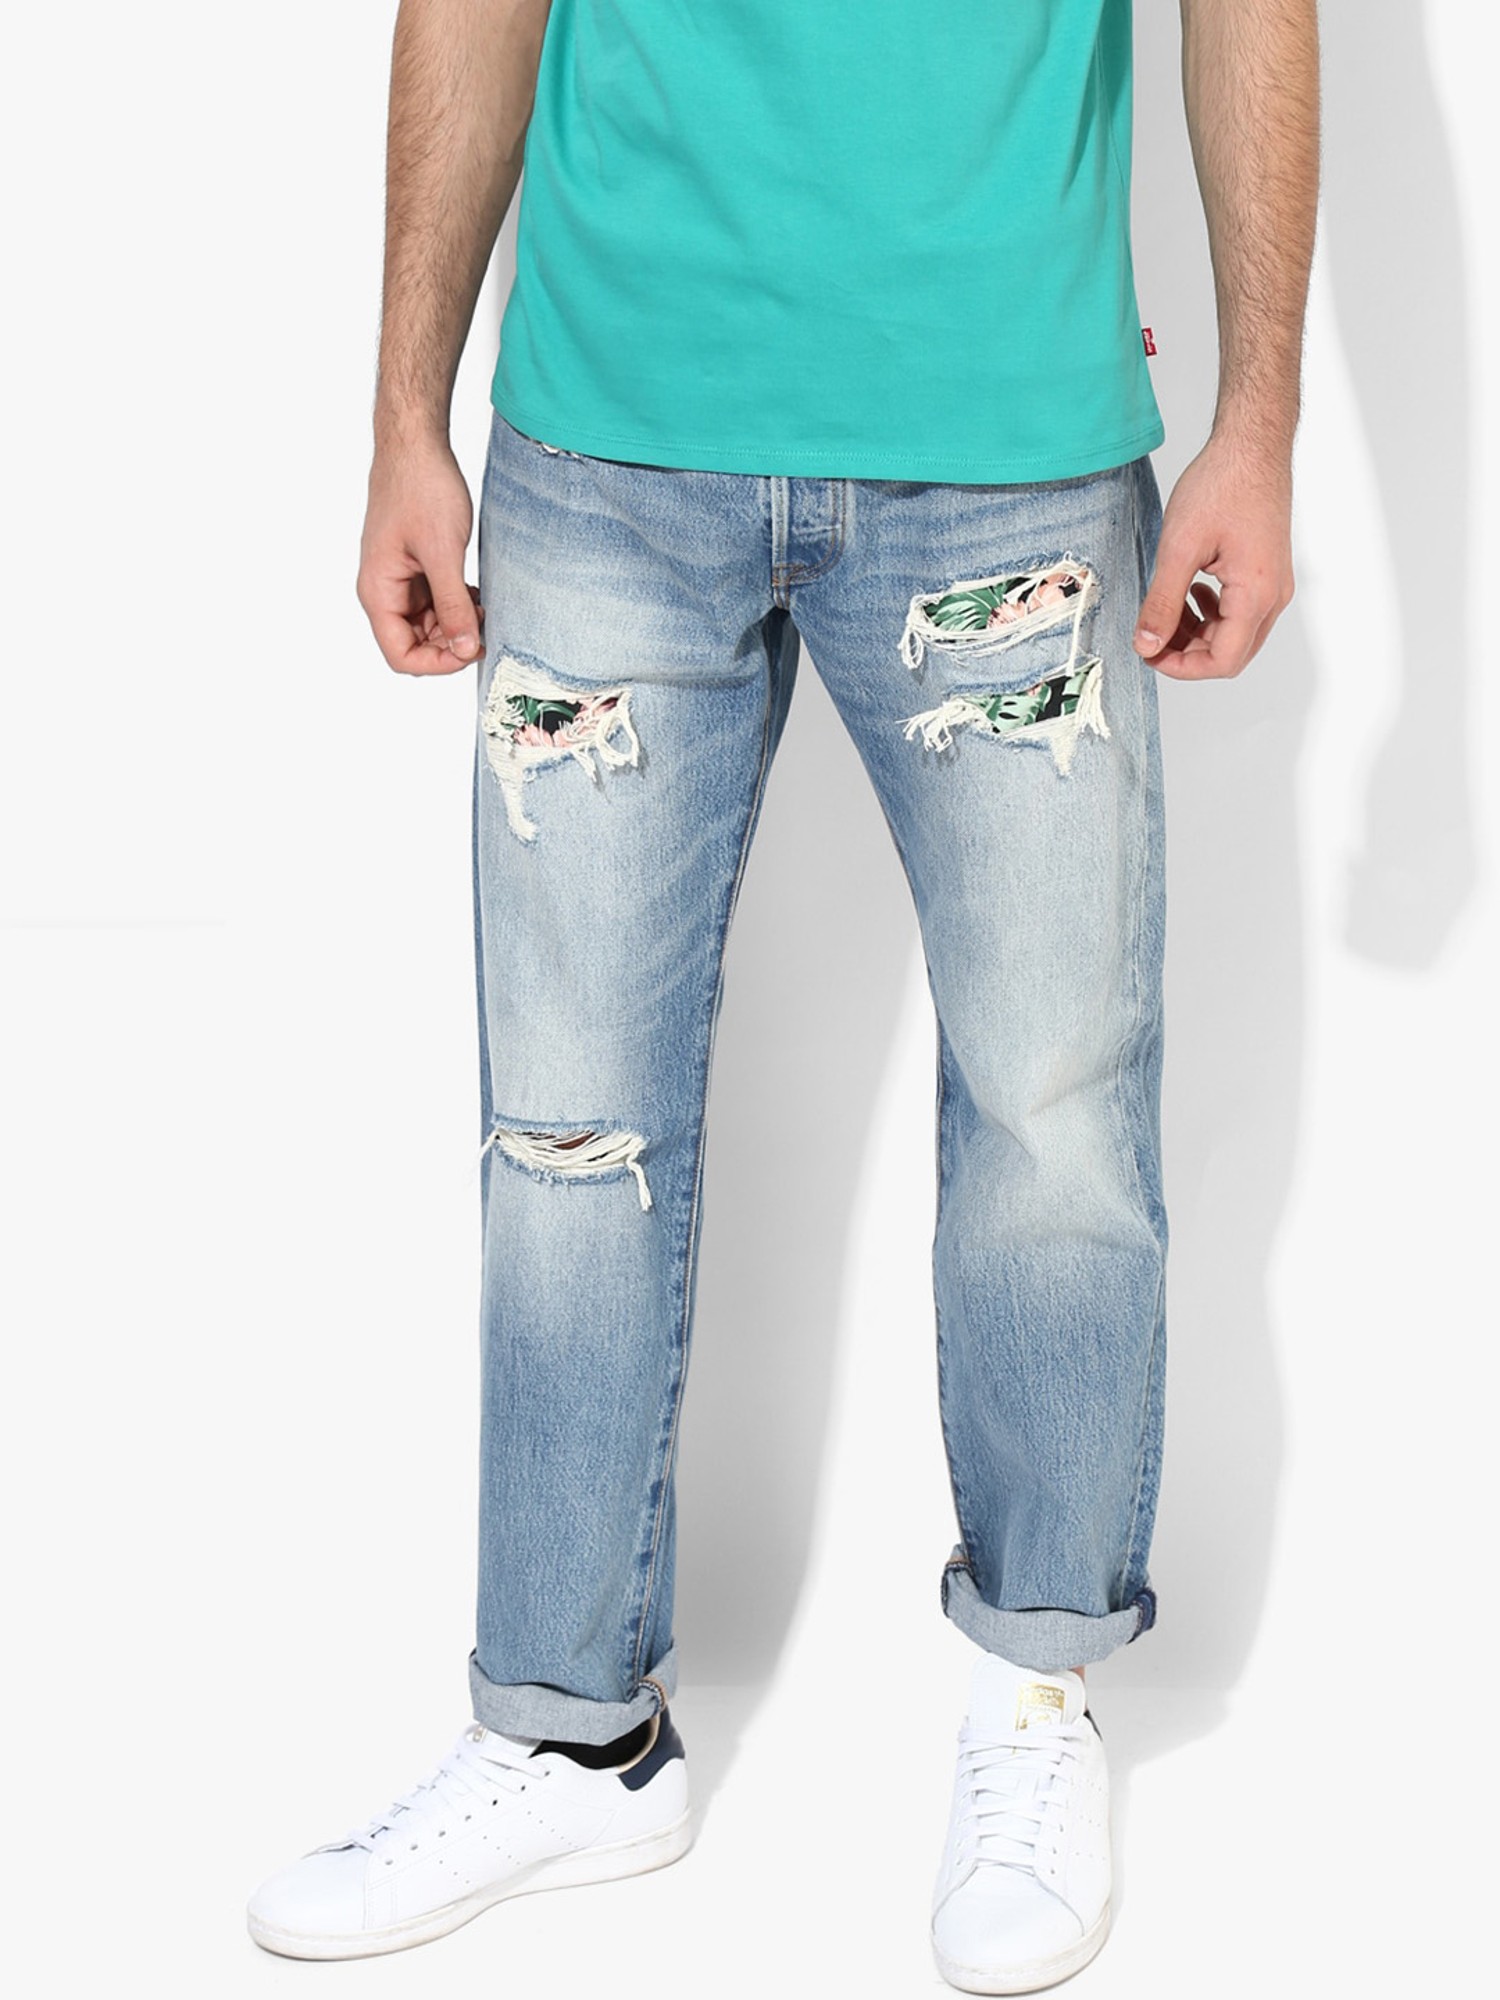 Levis 501 Skinny Old Hangouts  Light Blue Distressed Jeans  Lulus